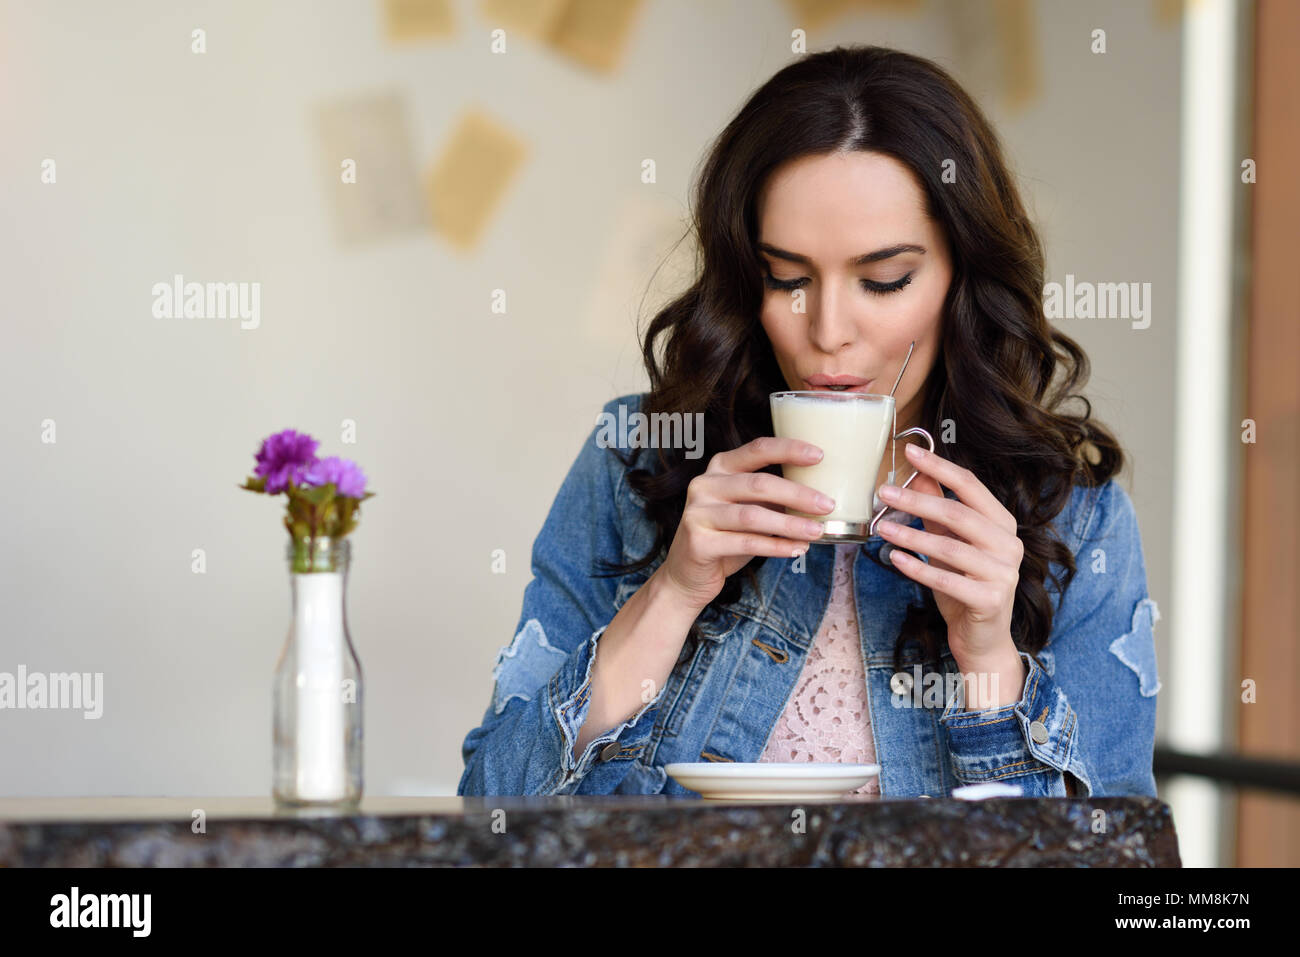 Young woman sitting indoor drinking coffee. Cool young modern caucasian female in her 20s. Cafe city lifestyle. Stock Photo